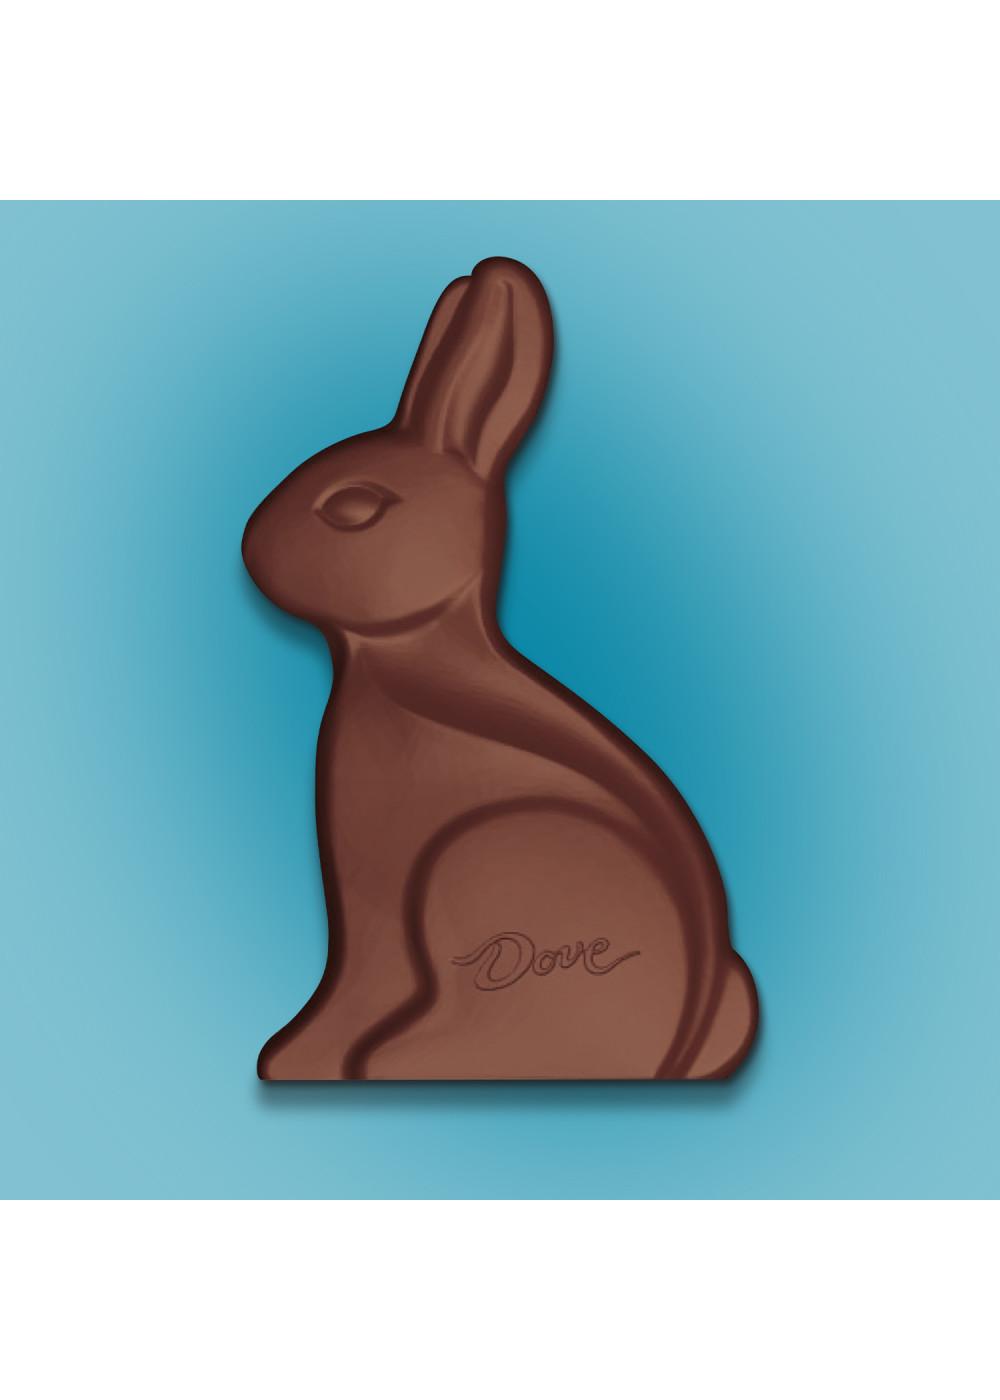 Dove Solid Milk Chocolate Bunny Easter Candy; image 6 of 7